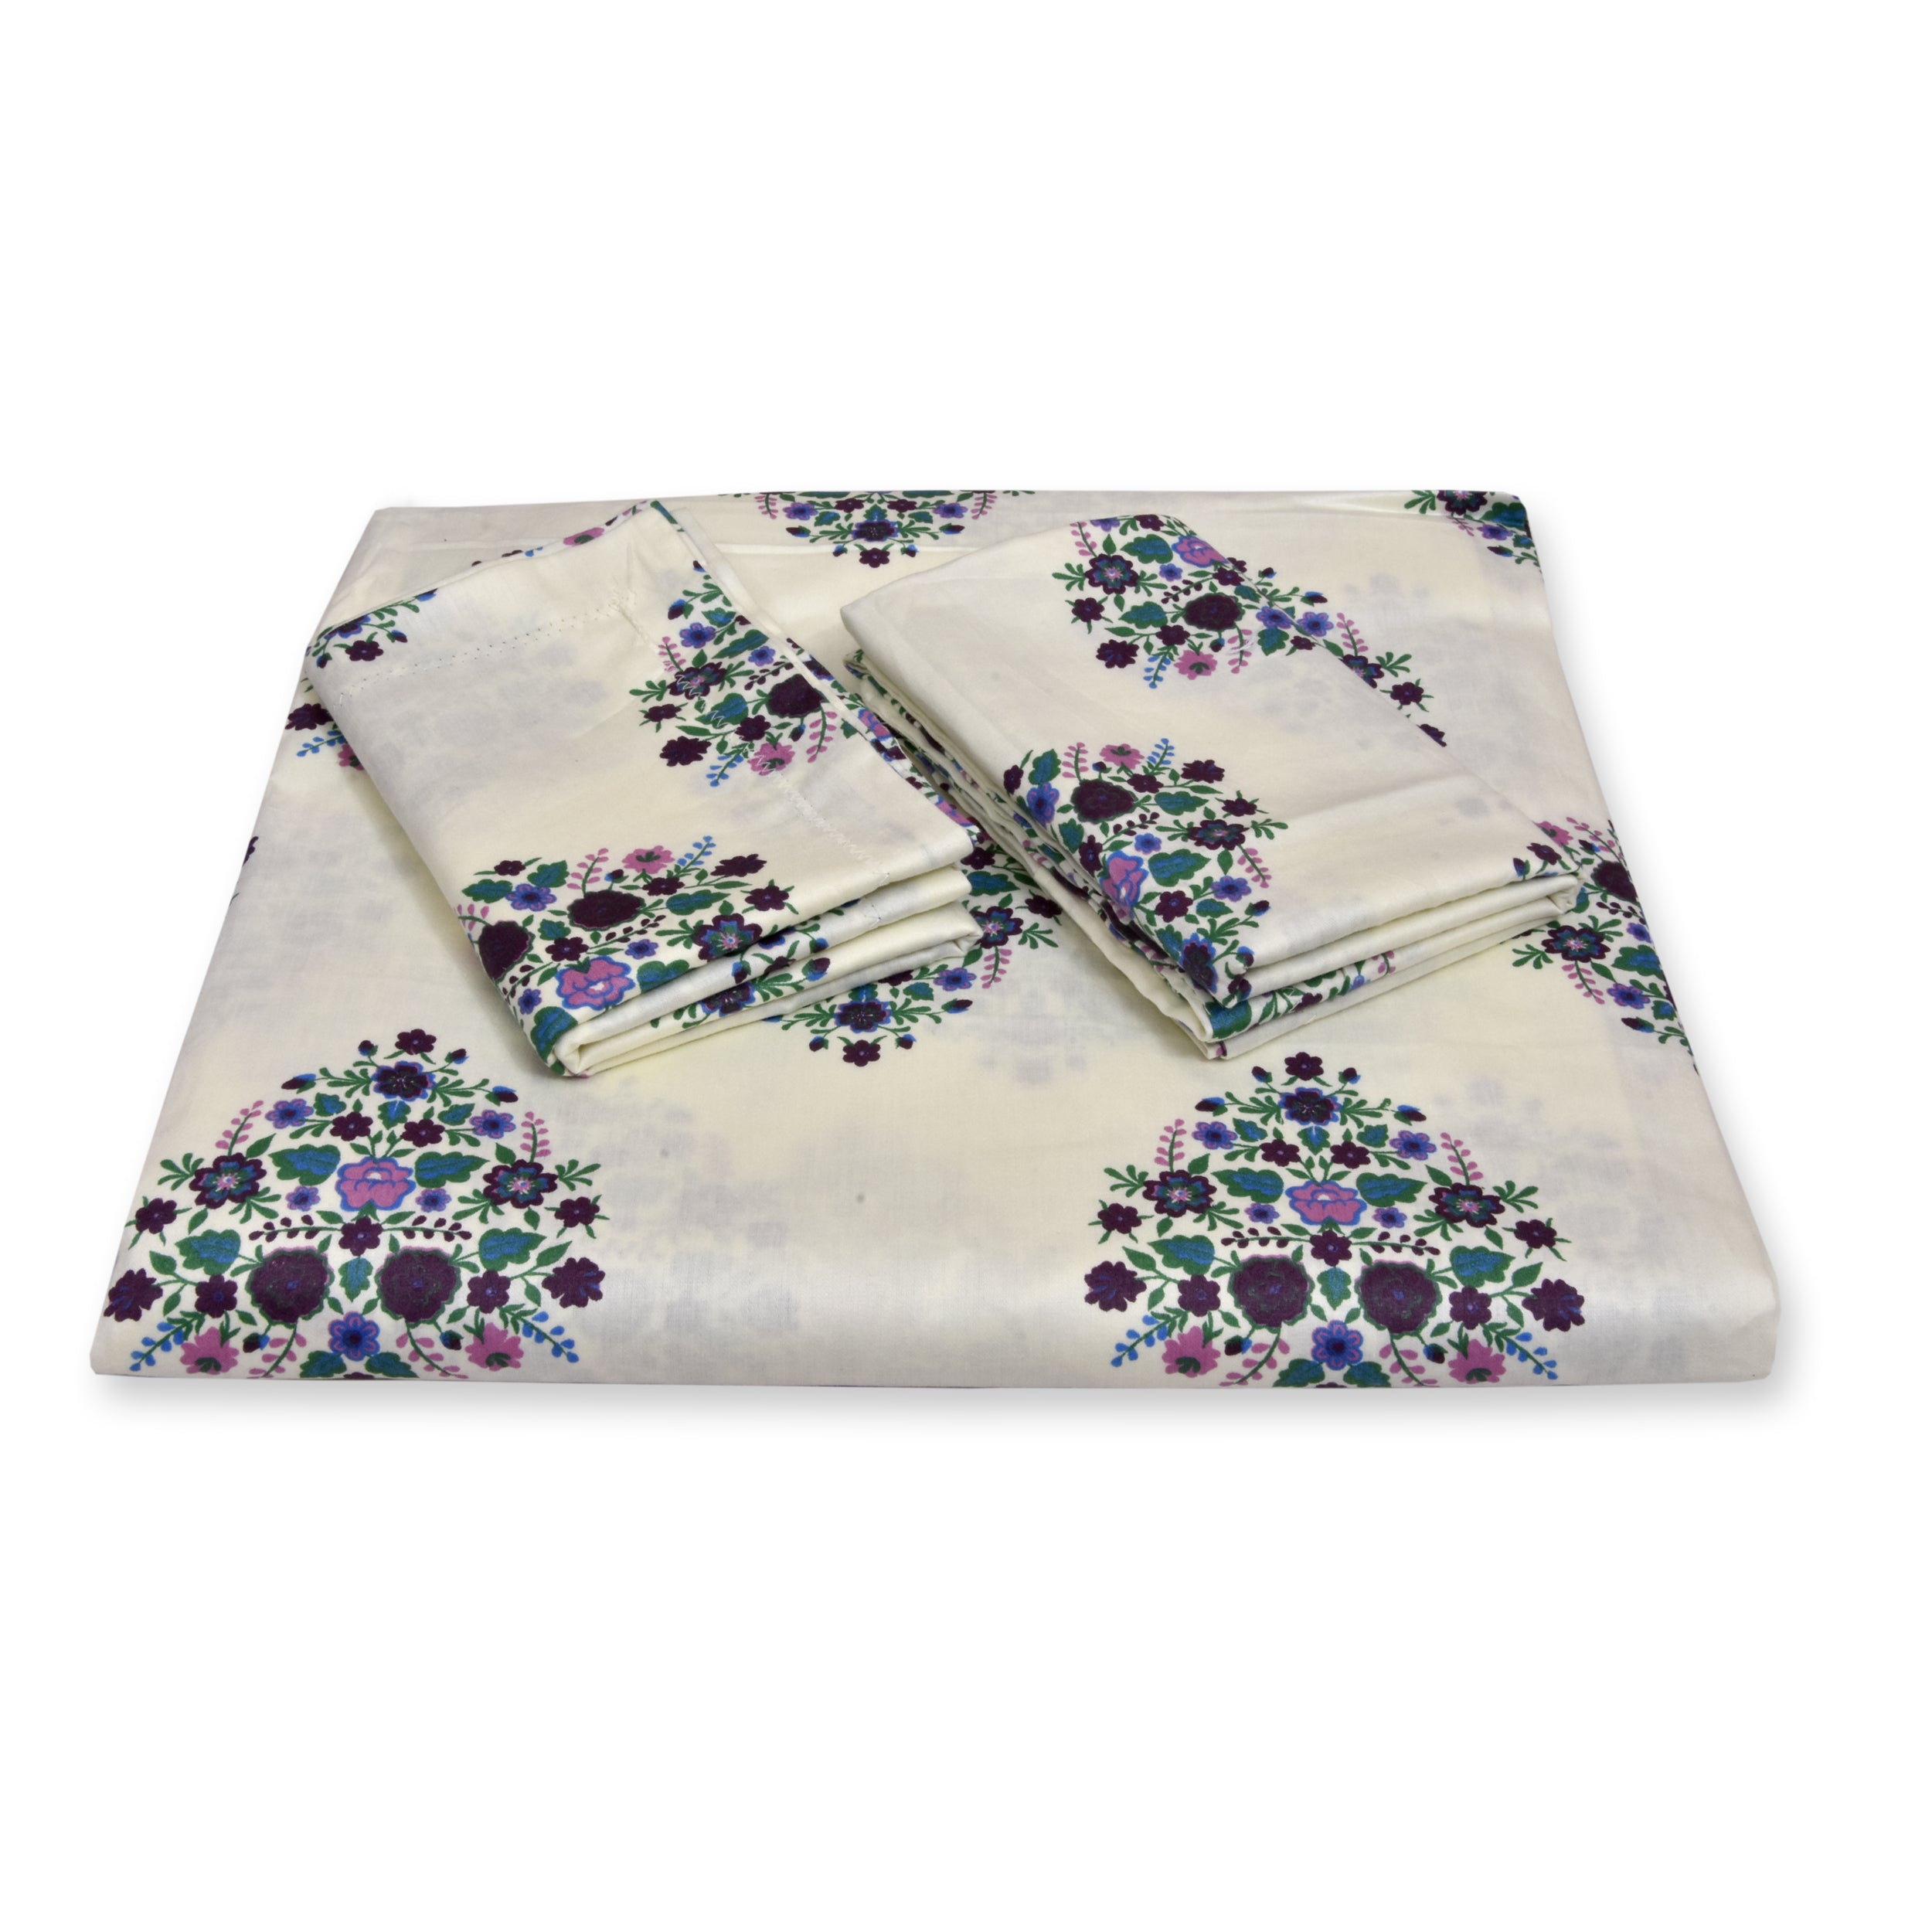 250 TC Pure Cotton Floral Print Premium Double Bed Bedsheet (100 In x 108 In) with 2 pillow cover - Beige, Green and Purple 3